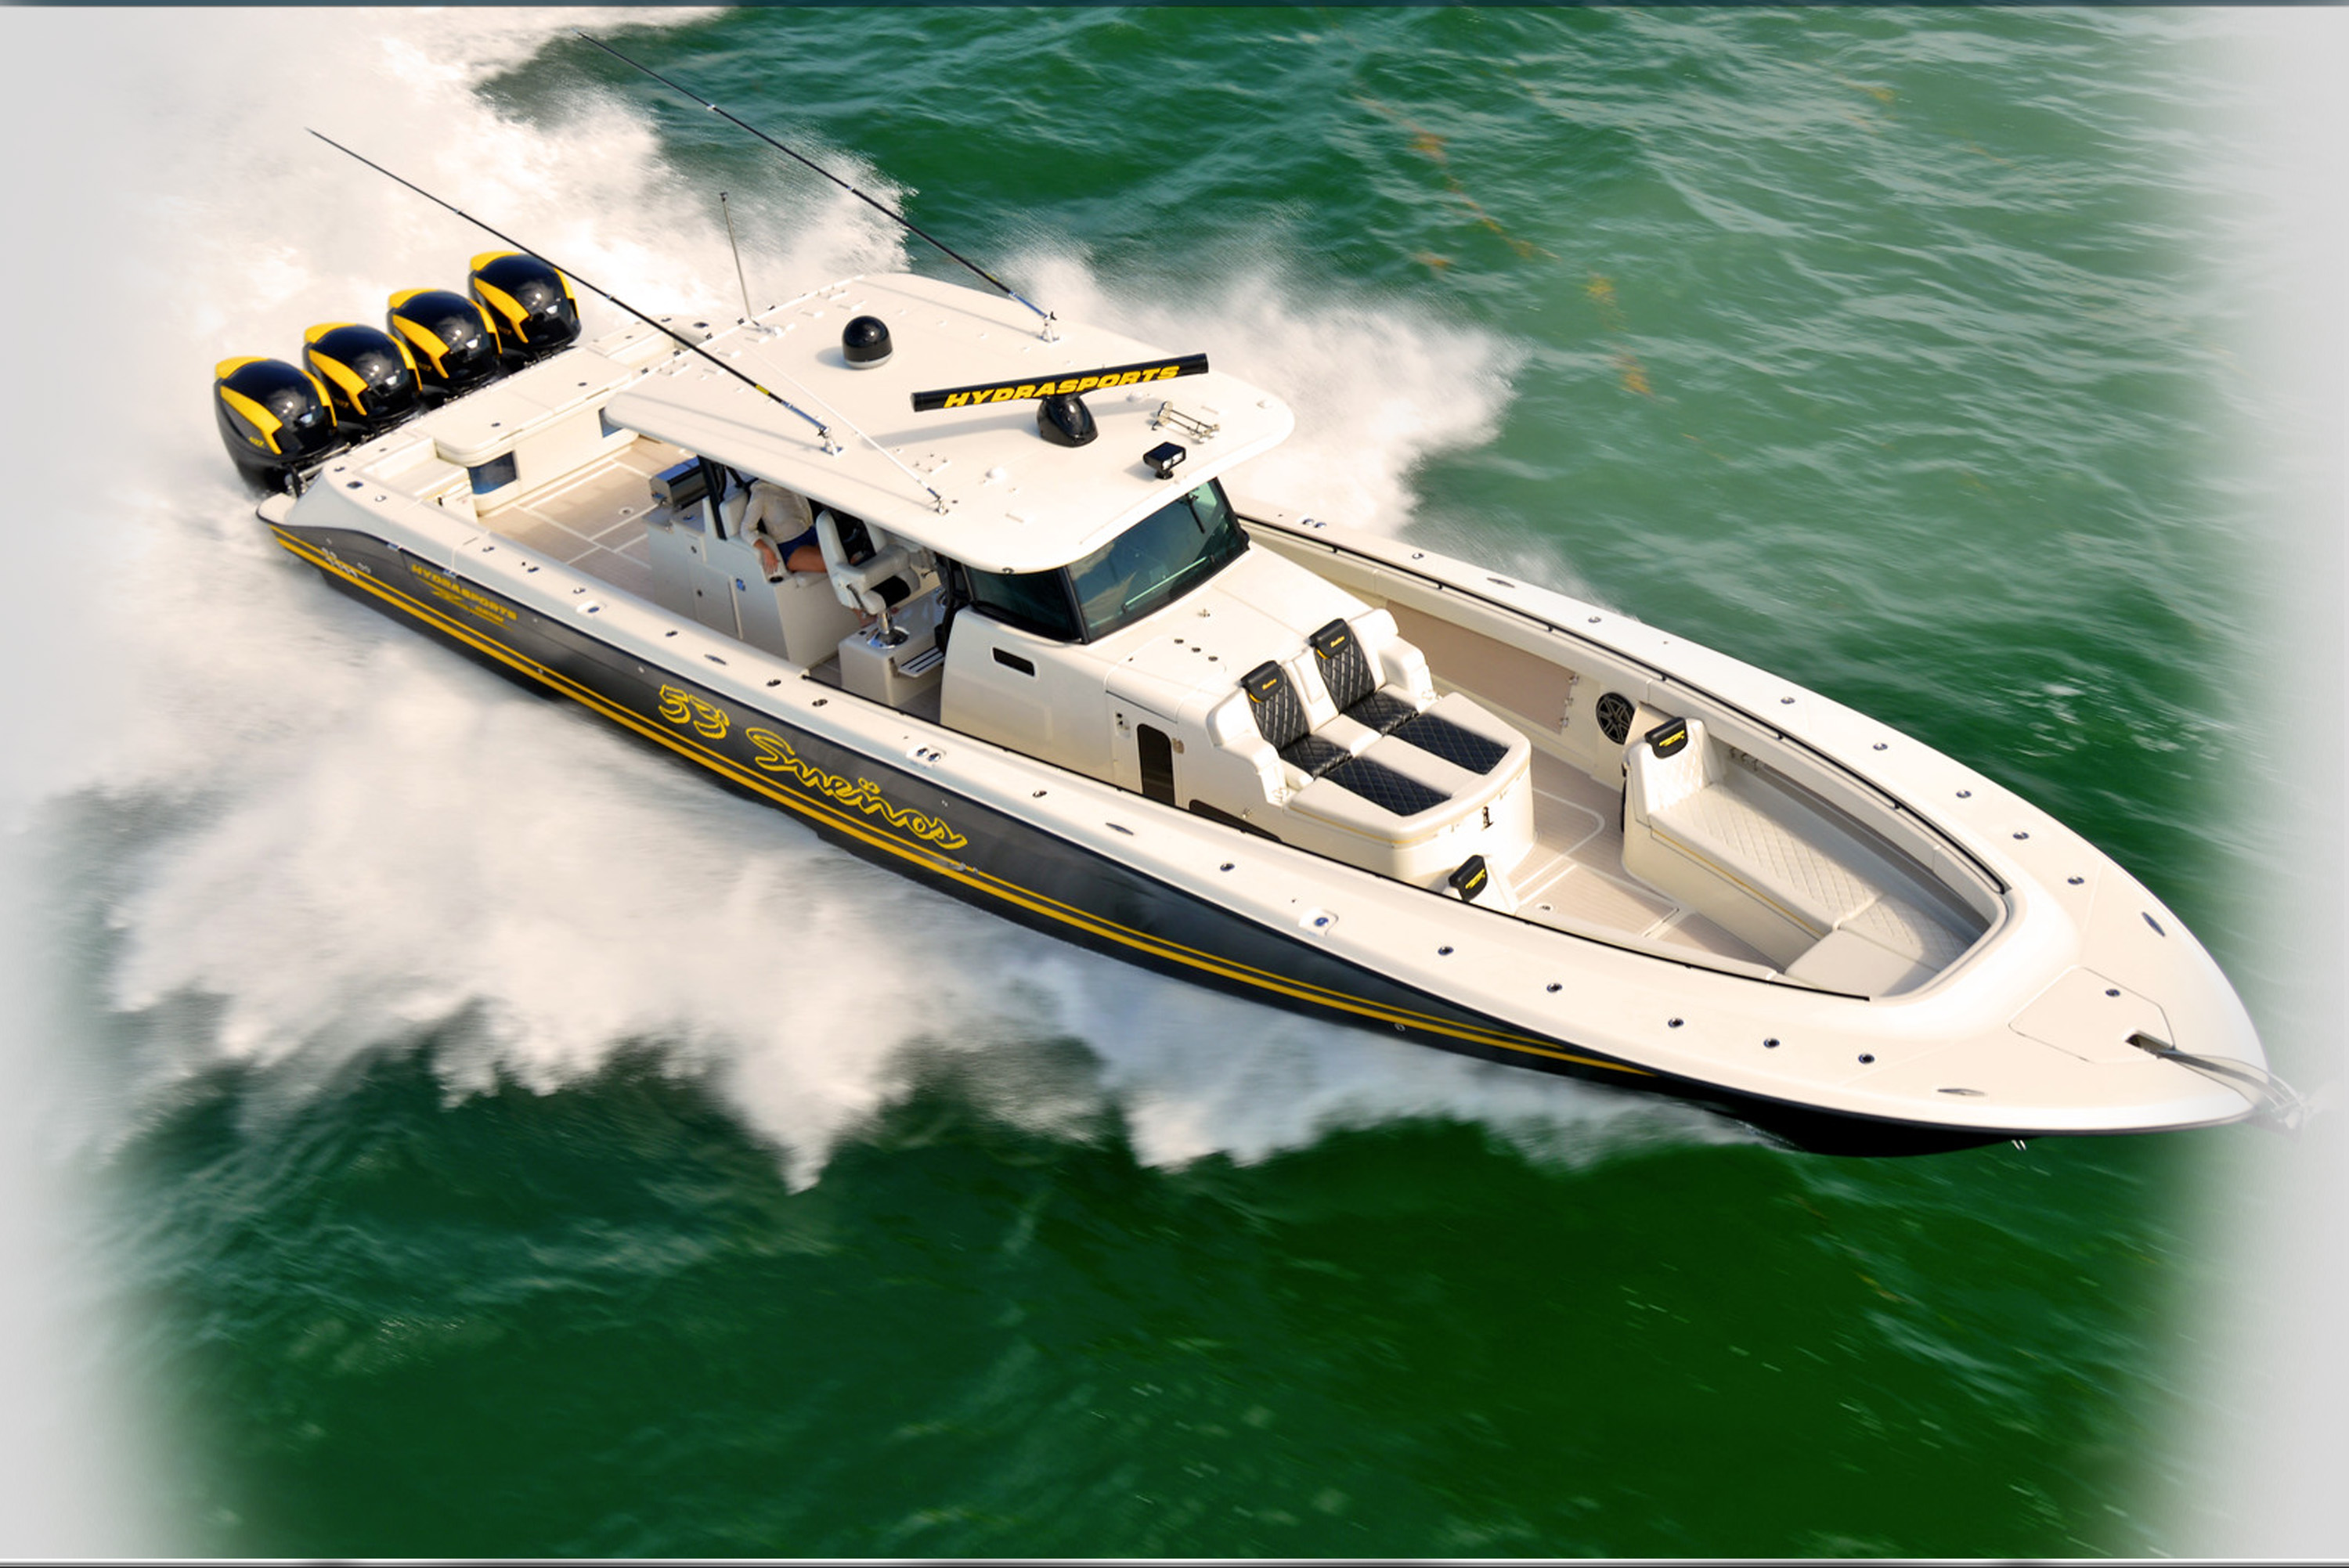 Speed Boat Insanity at Fort Lauderdale: More Powerful Outboards, and More of Them